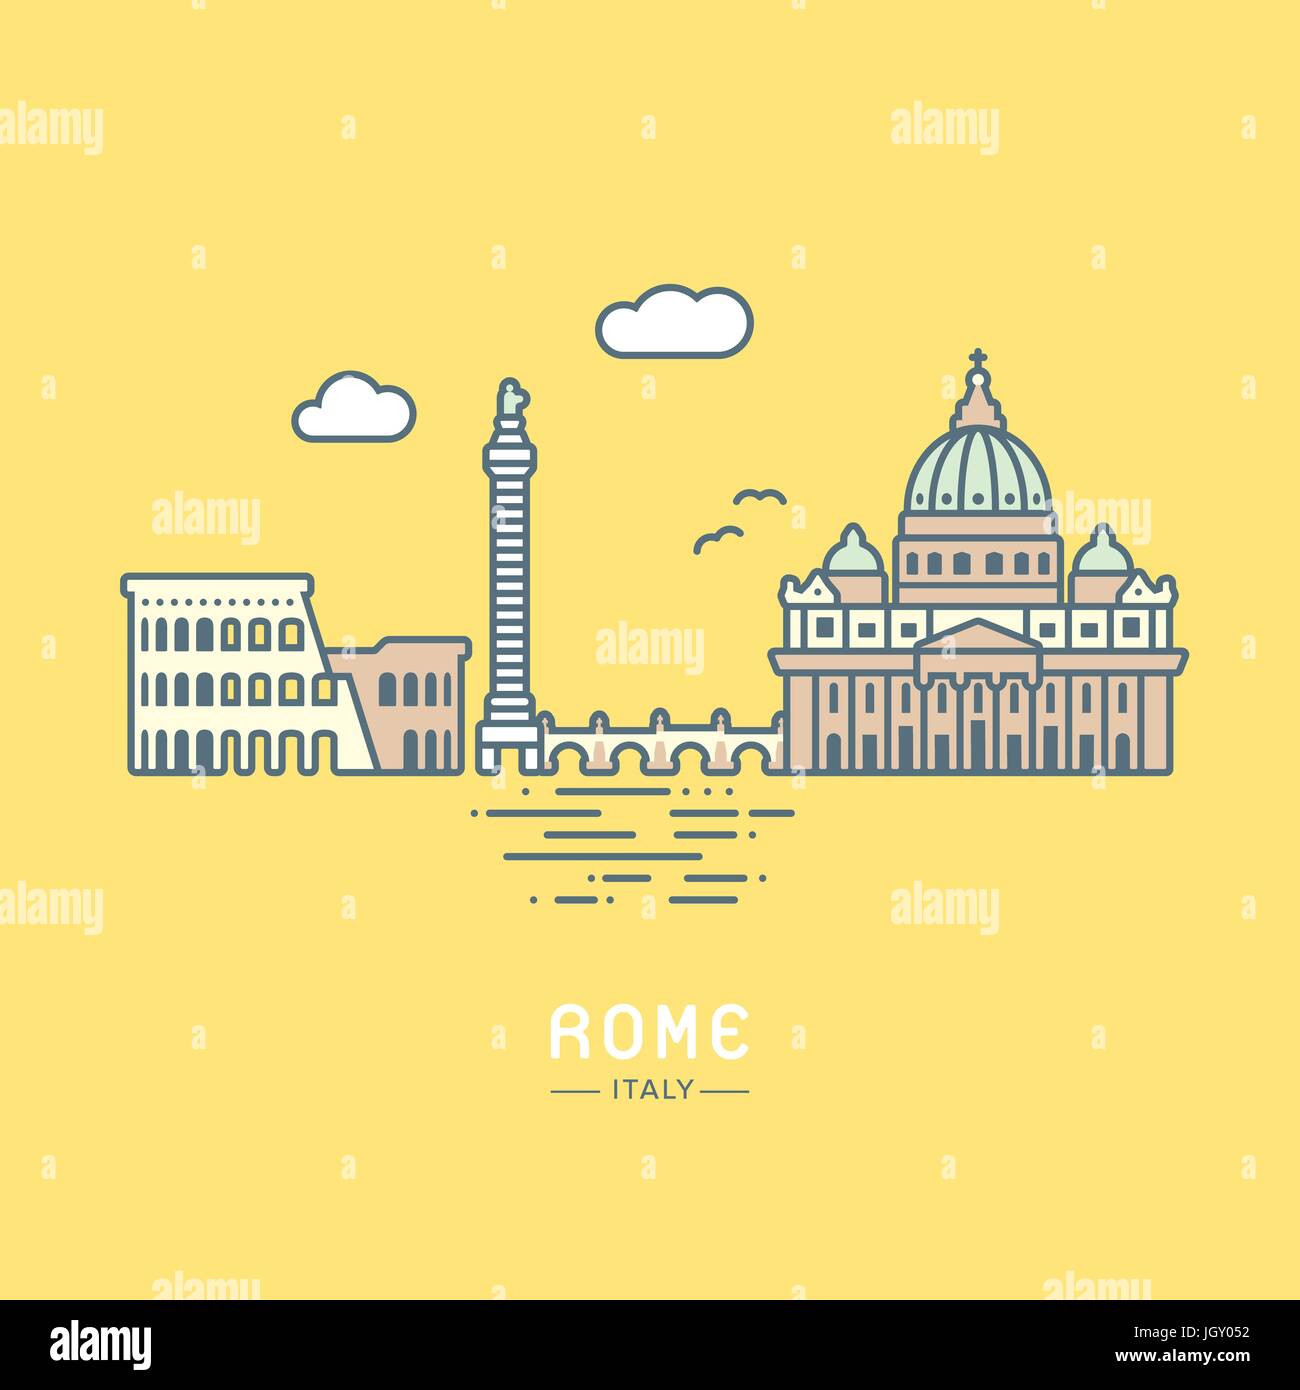 Line Icon style Rome city flat vector illustration Stock Vector